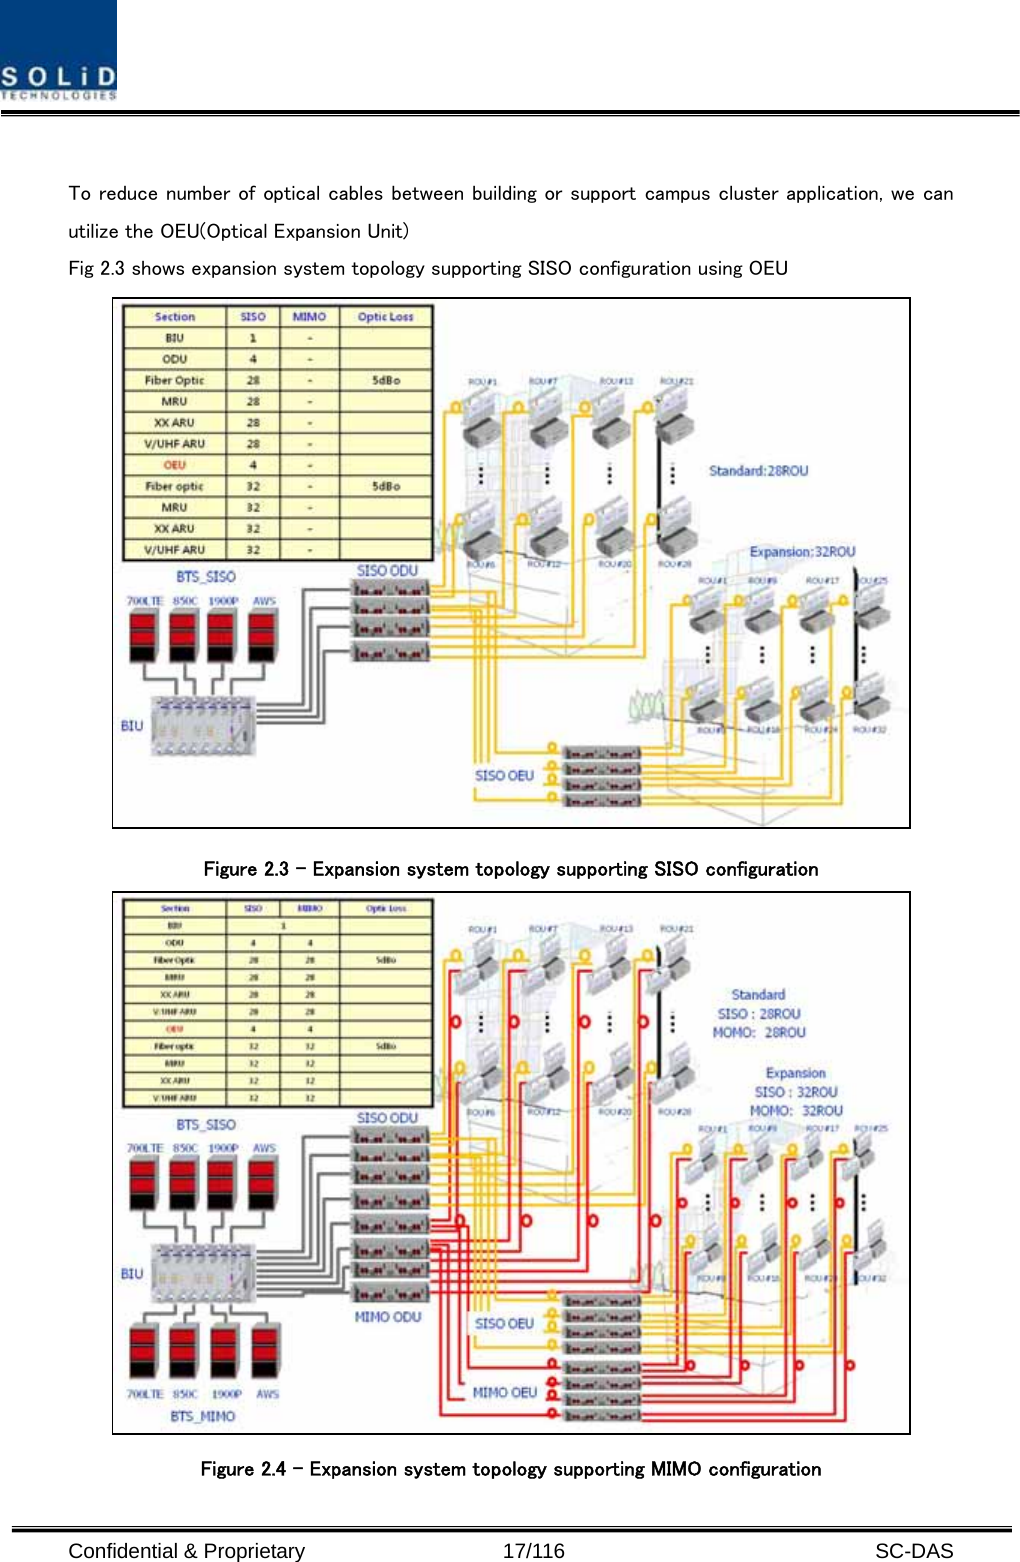  Confidential &amp; Proprietary                   17/116   SC-DAS  To reduce number of optical cables between building or support campus cluster application, we can utilize the OEU(Optical Expansion Unit) Fig 2.3 shows expansion system topology supporting SISO configuration using OEU  Figure 2.3 – Expansion system topology supporting SISO configuration  Figure 2.4 – Expansion system topology supporting MIMO configuration 